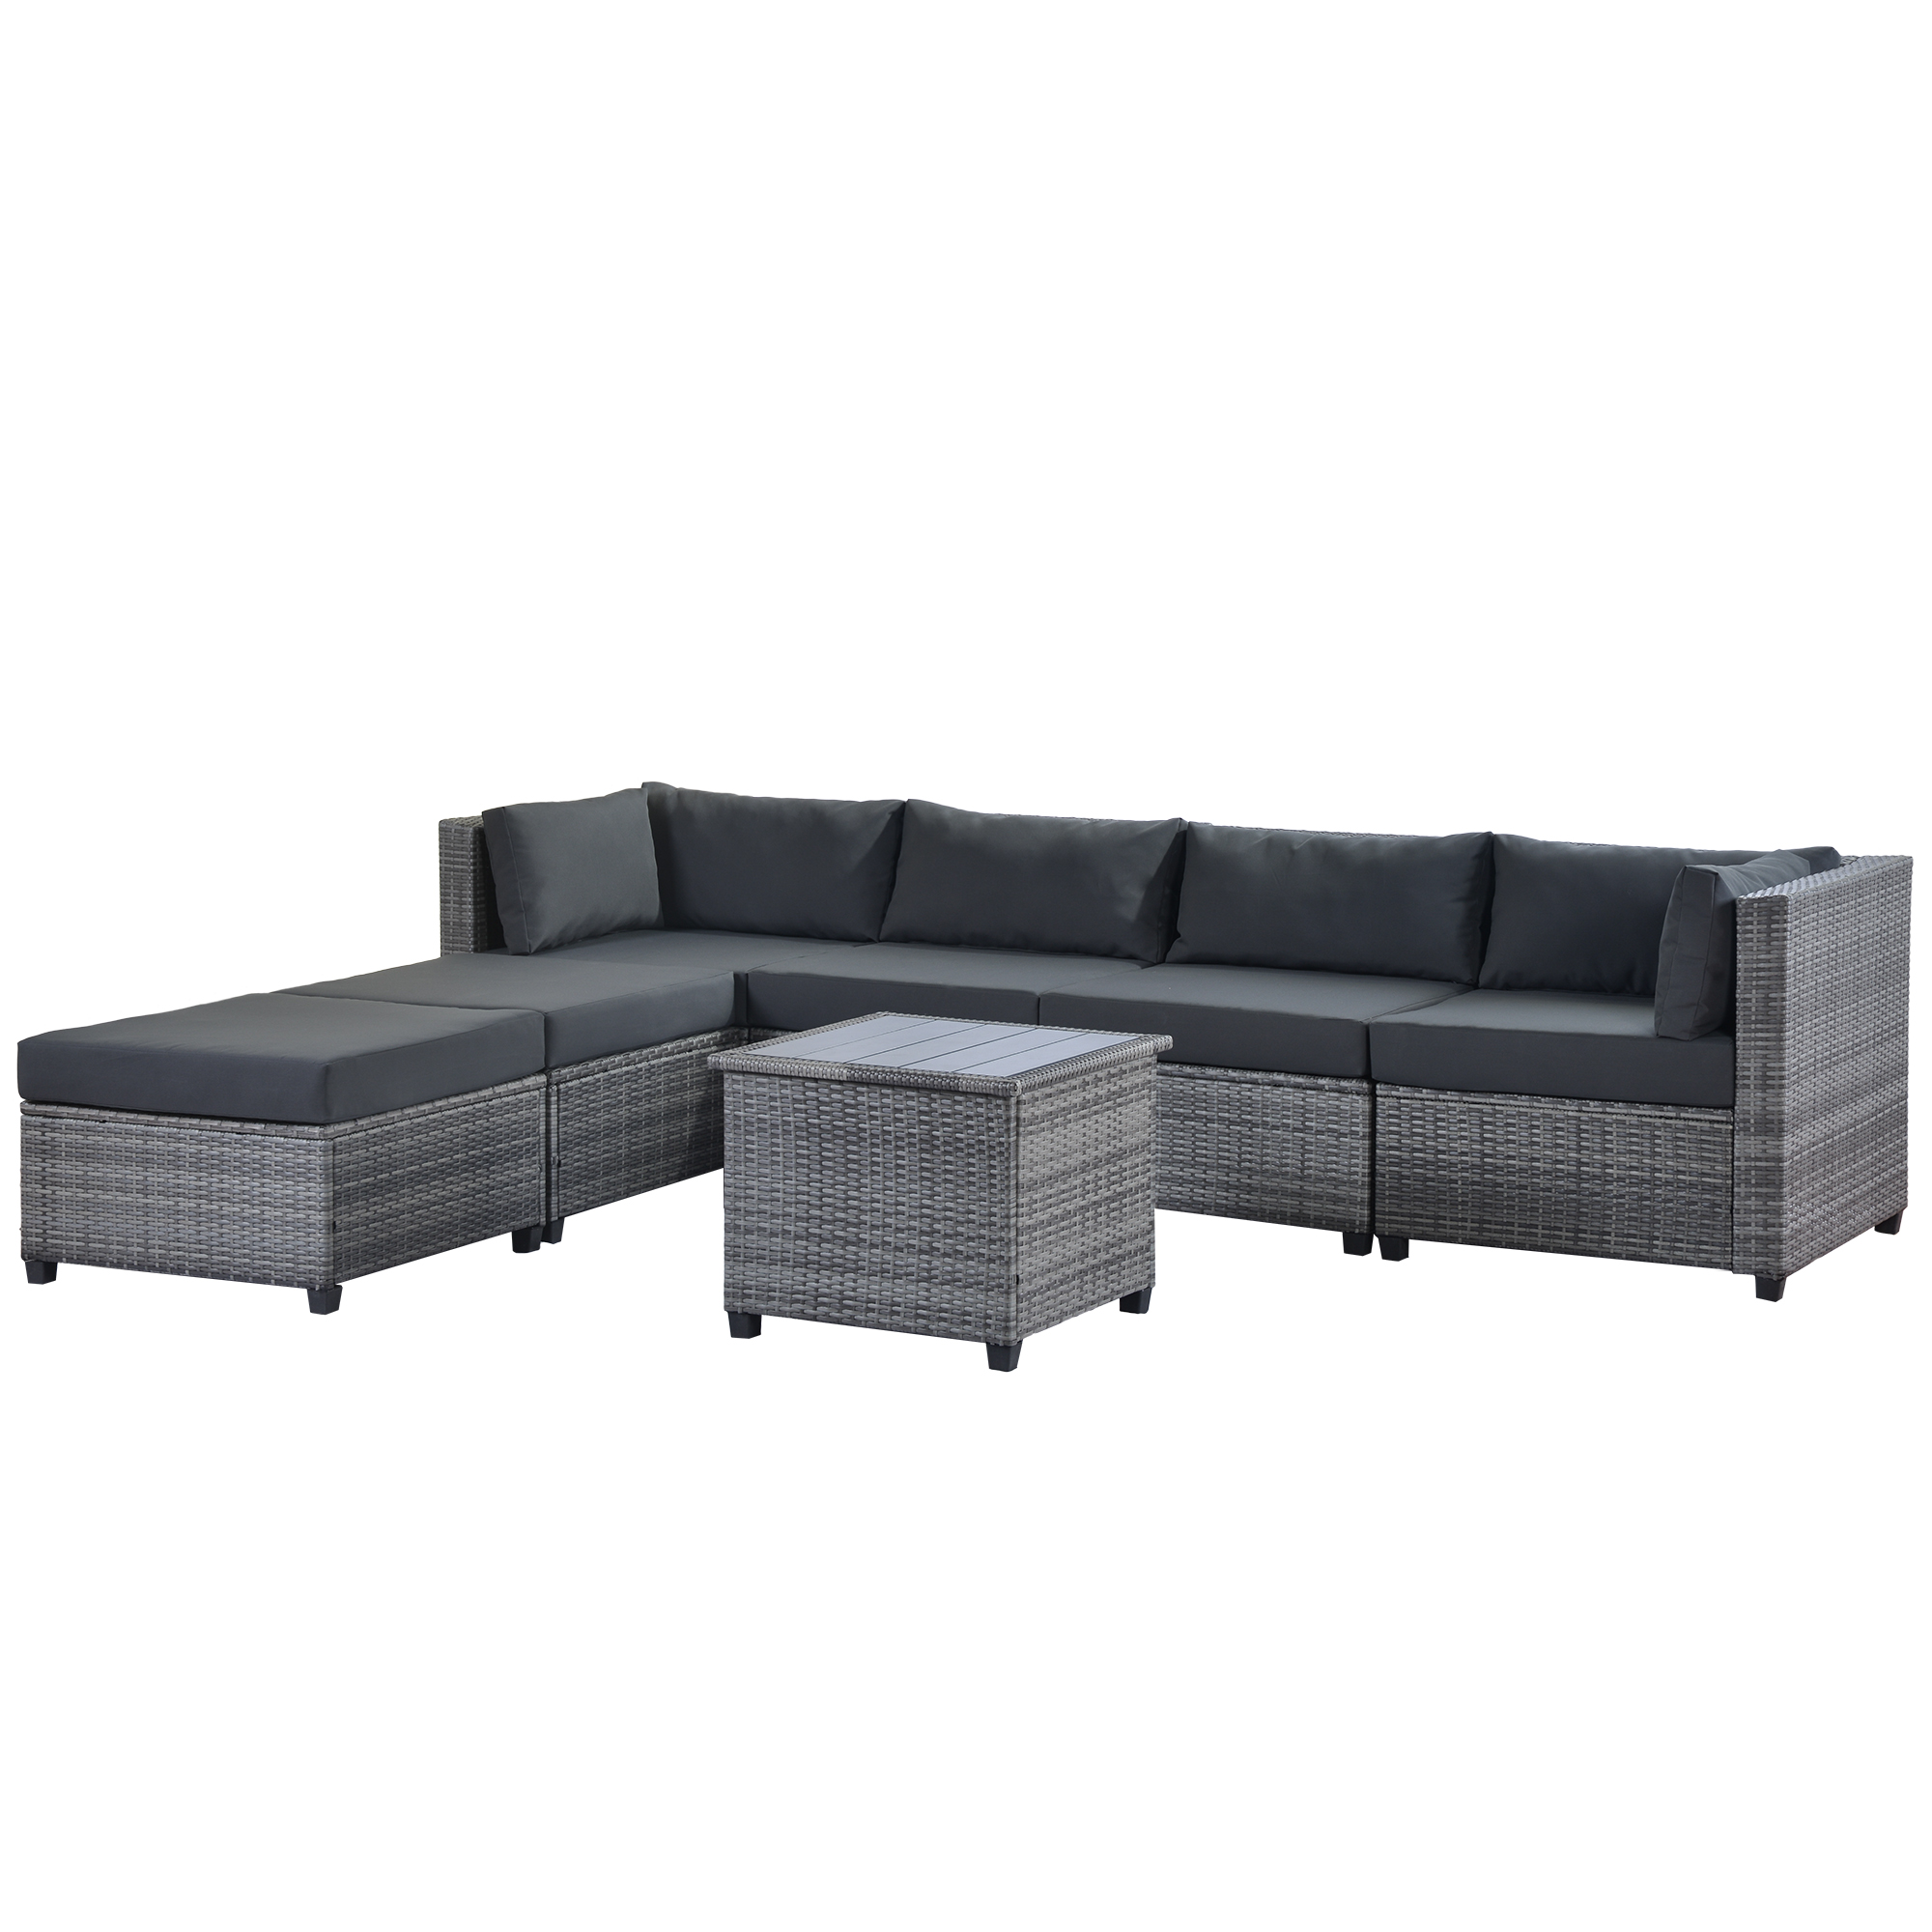 Outdoor Conversation Sets, 7 Piece Patio Furniture Sets with 4 PE Wicker Sofas, 2 Ottoman, Coffee Table, All-Weather Patio Sectional Sofa Set with Gray Cushions for Backyard Porch Garden Pool, LLL33 - image 3 of 8